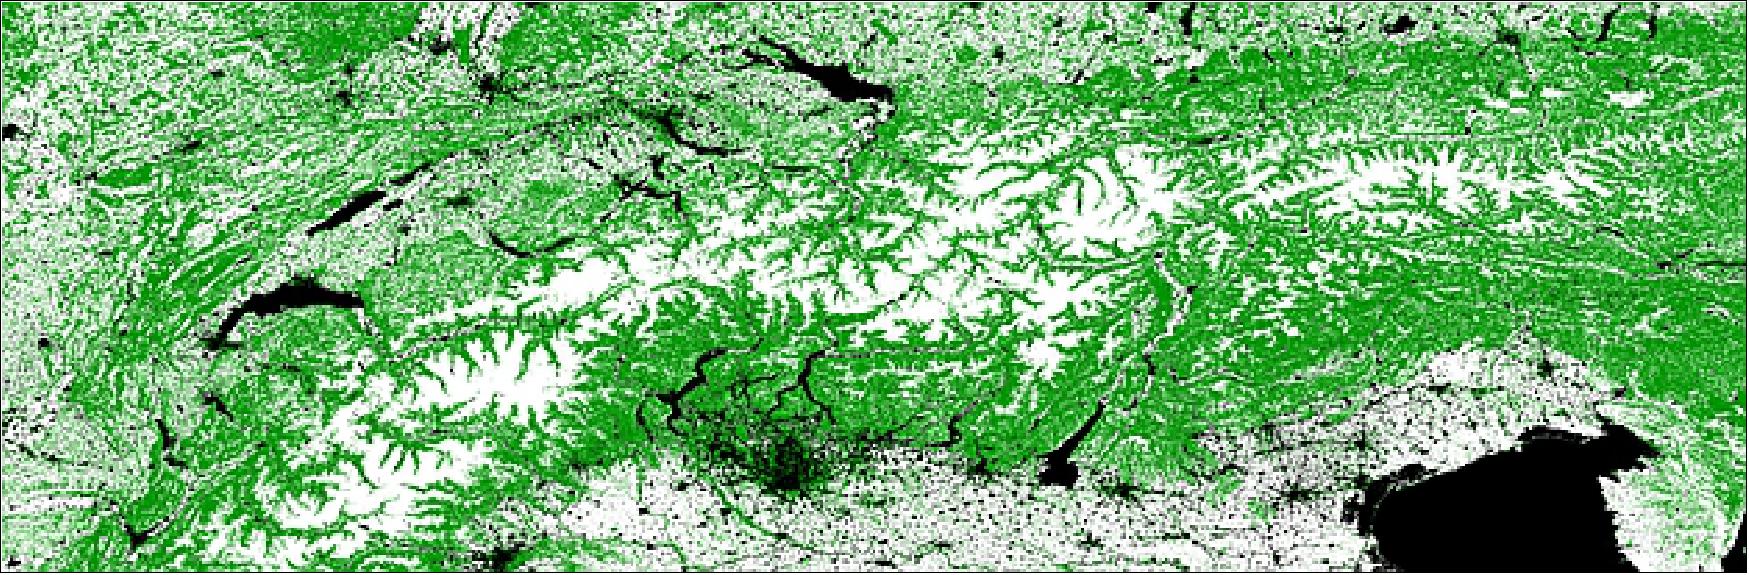 Figure 36: TanDEM-X Forest/Non-Forest Map example over the Alps (image credit: DLR)